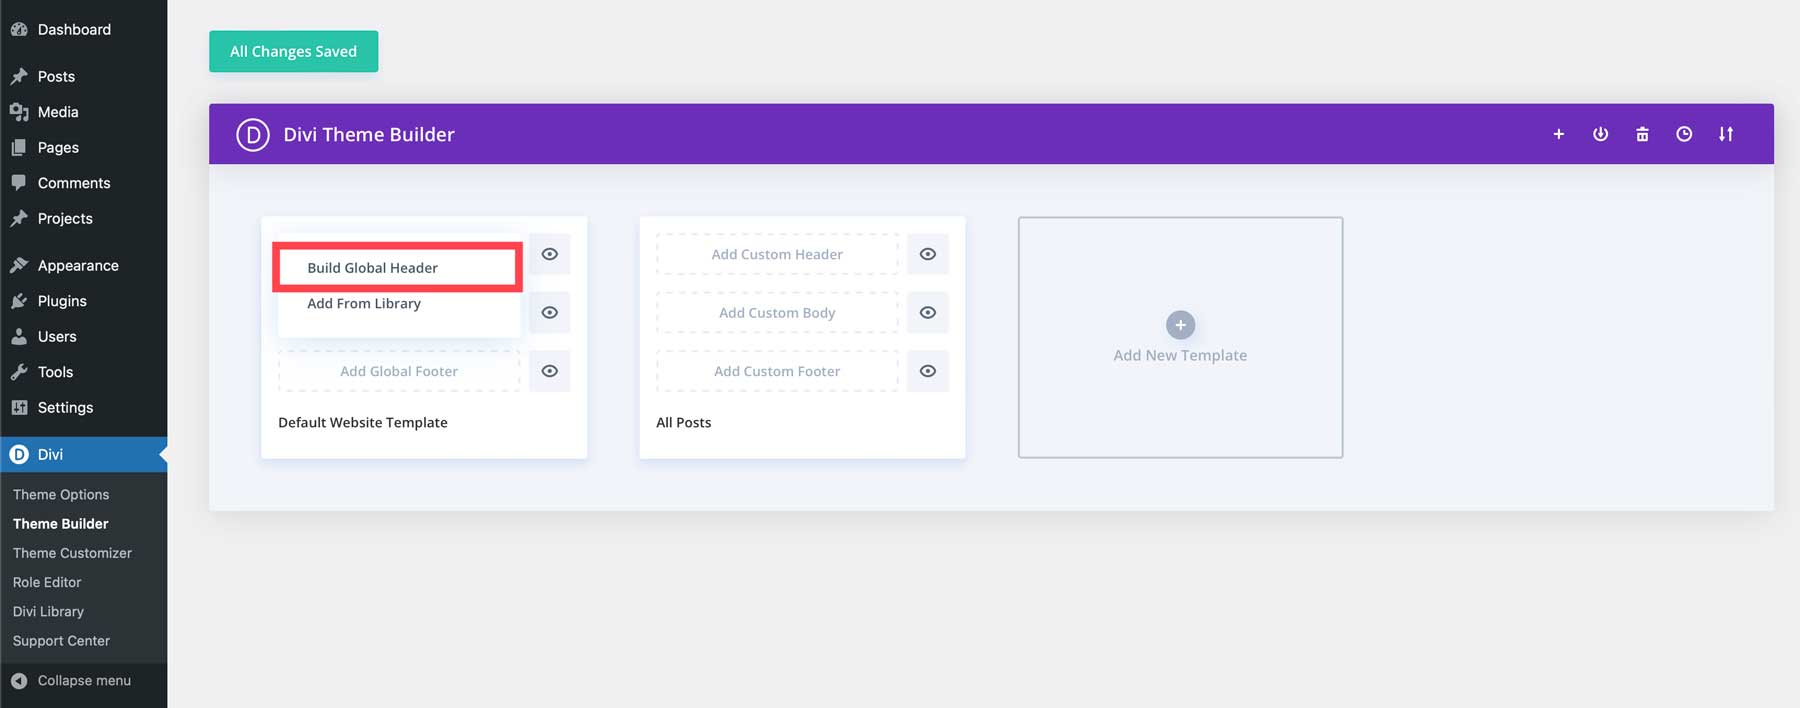 build global header with Divi Theme Builder